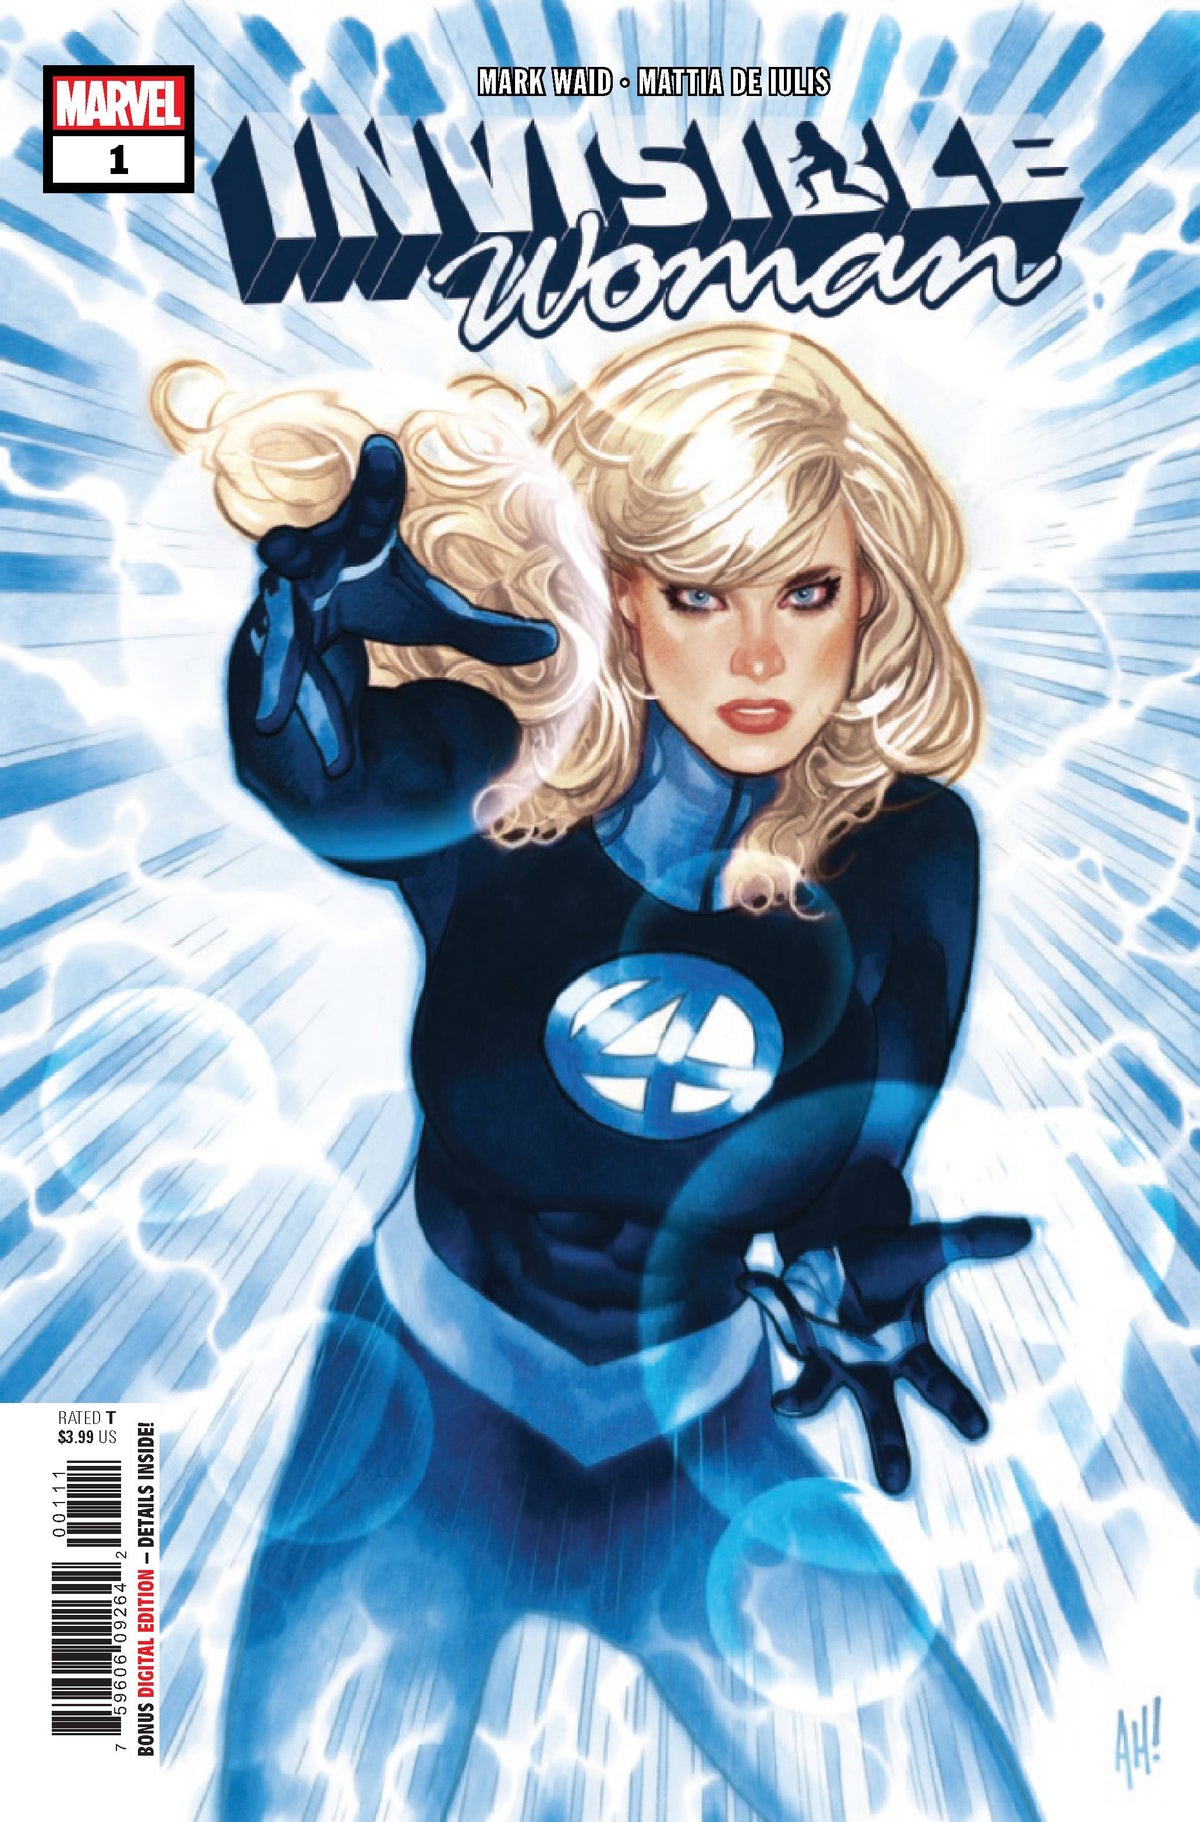 Photo of Invisible Woman Issue 1 (of 5) comic sold by Stronghold Collectibles